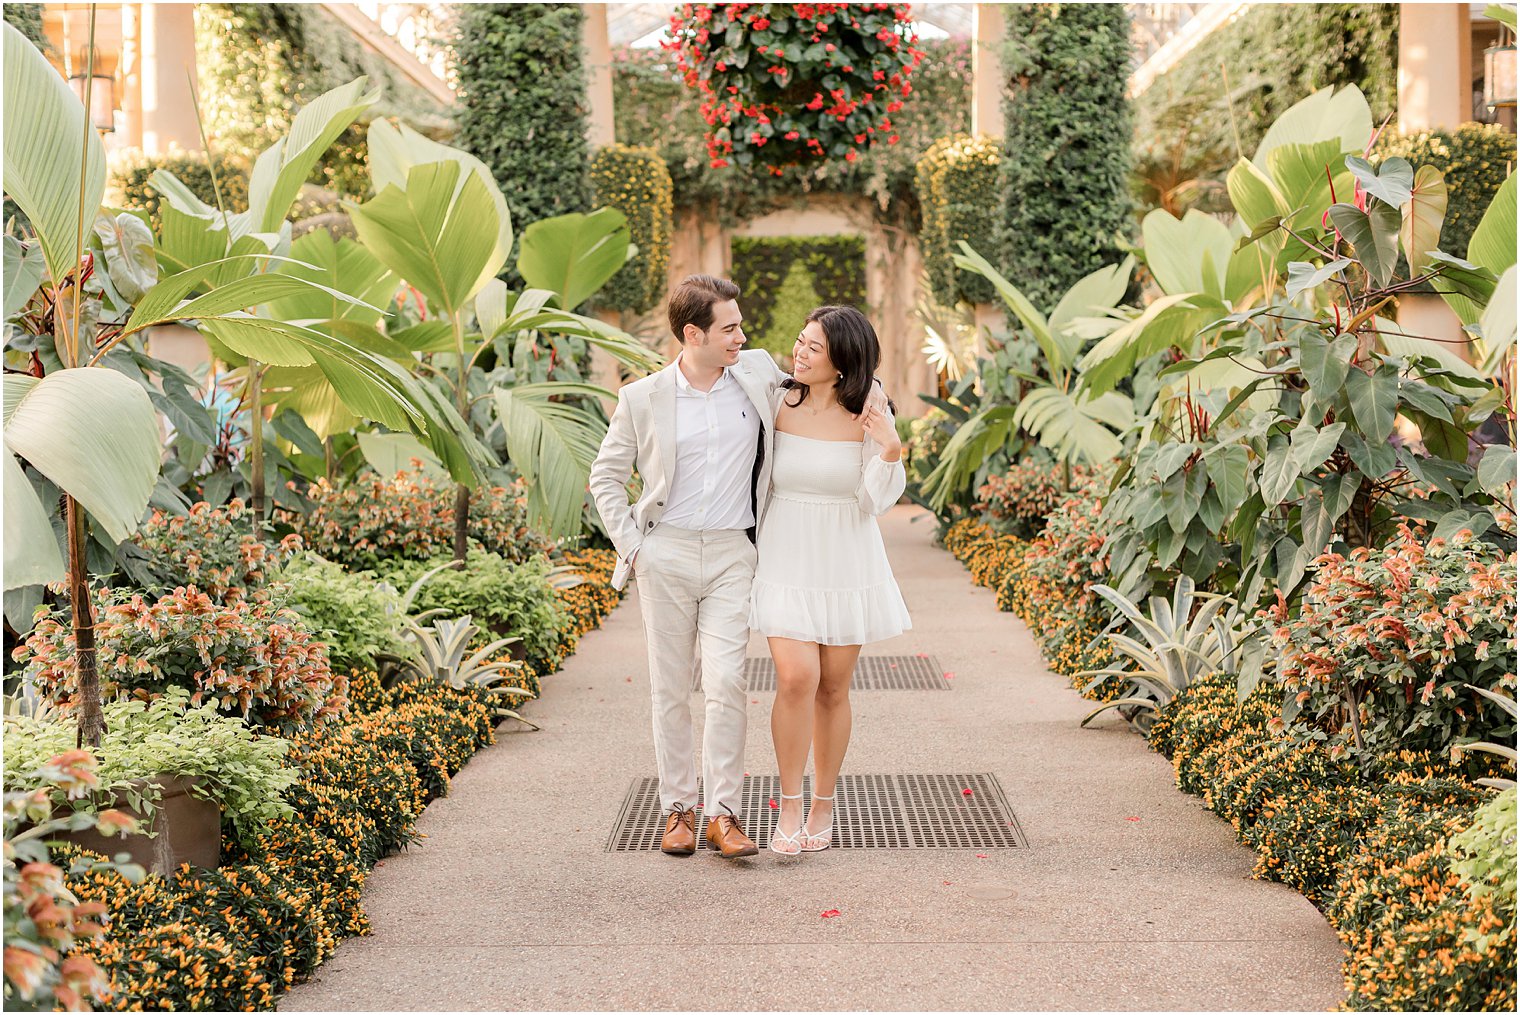 woman and man hold hands walking between rows of plants